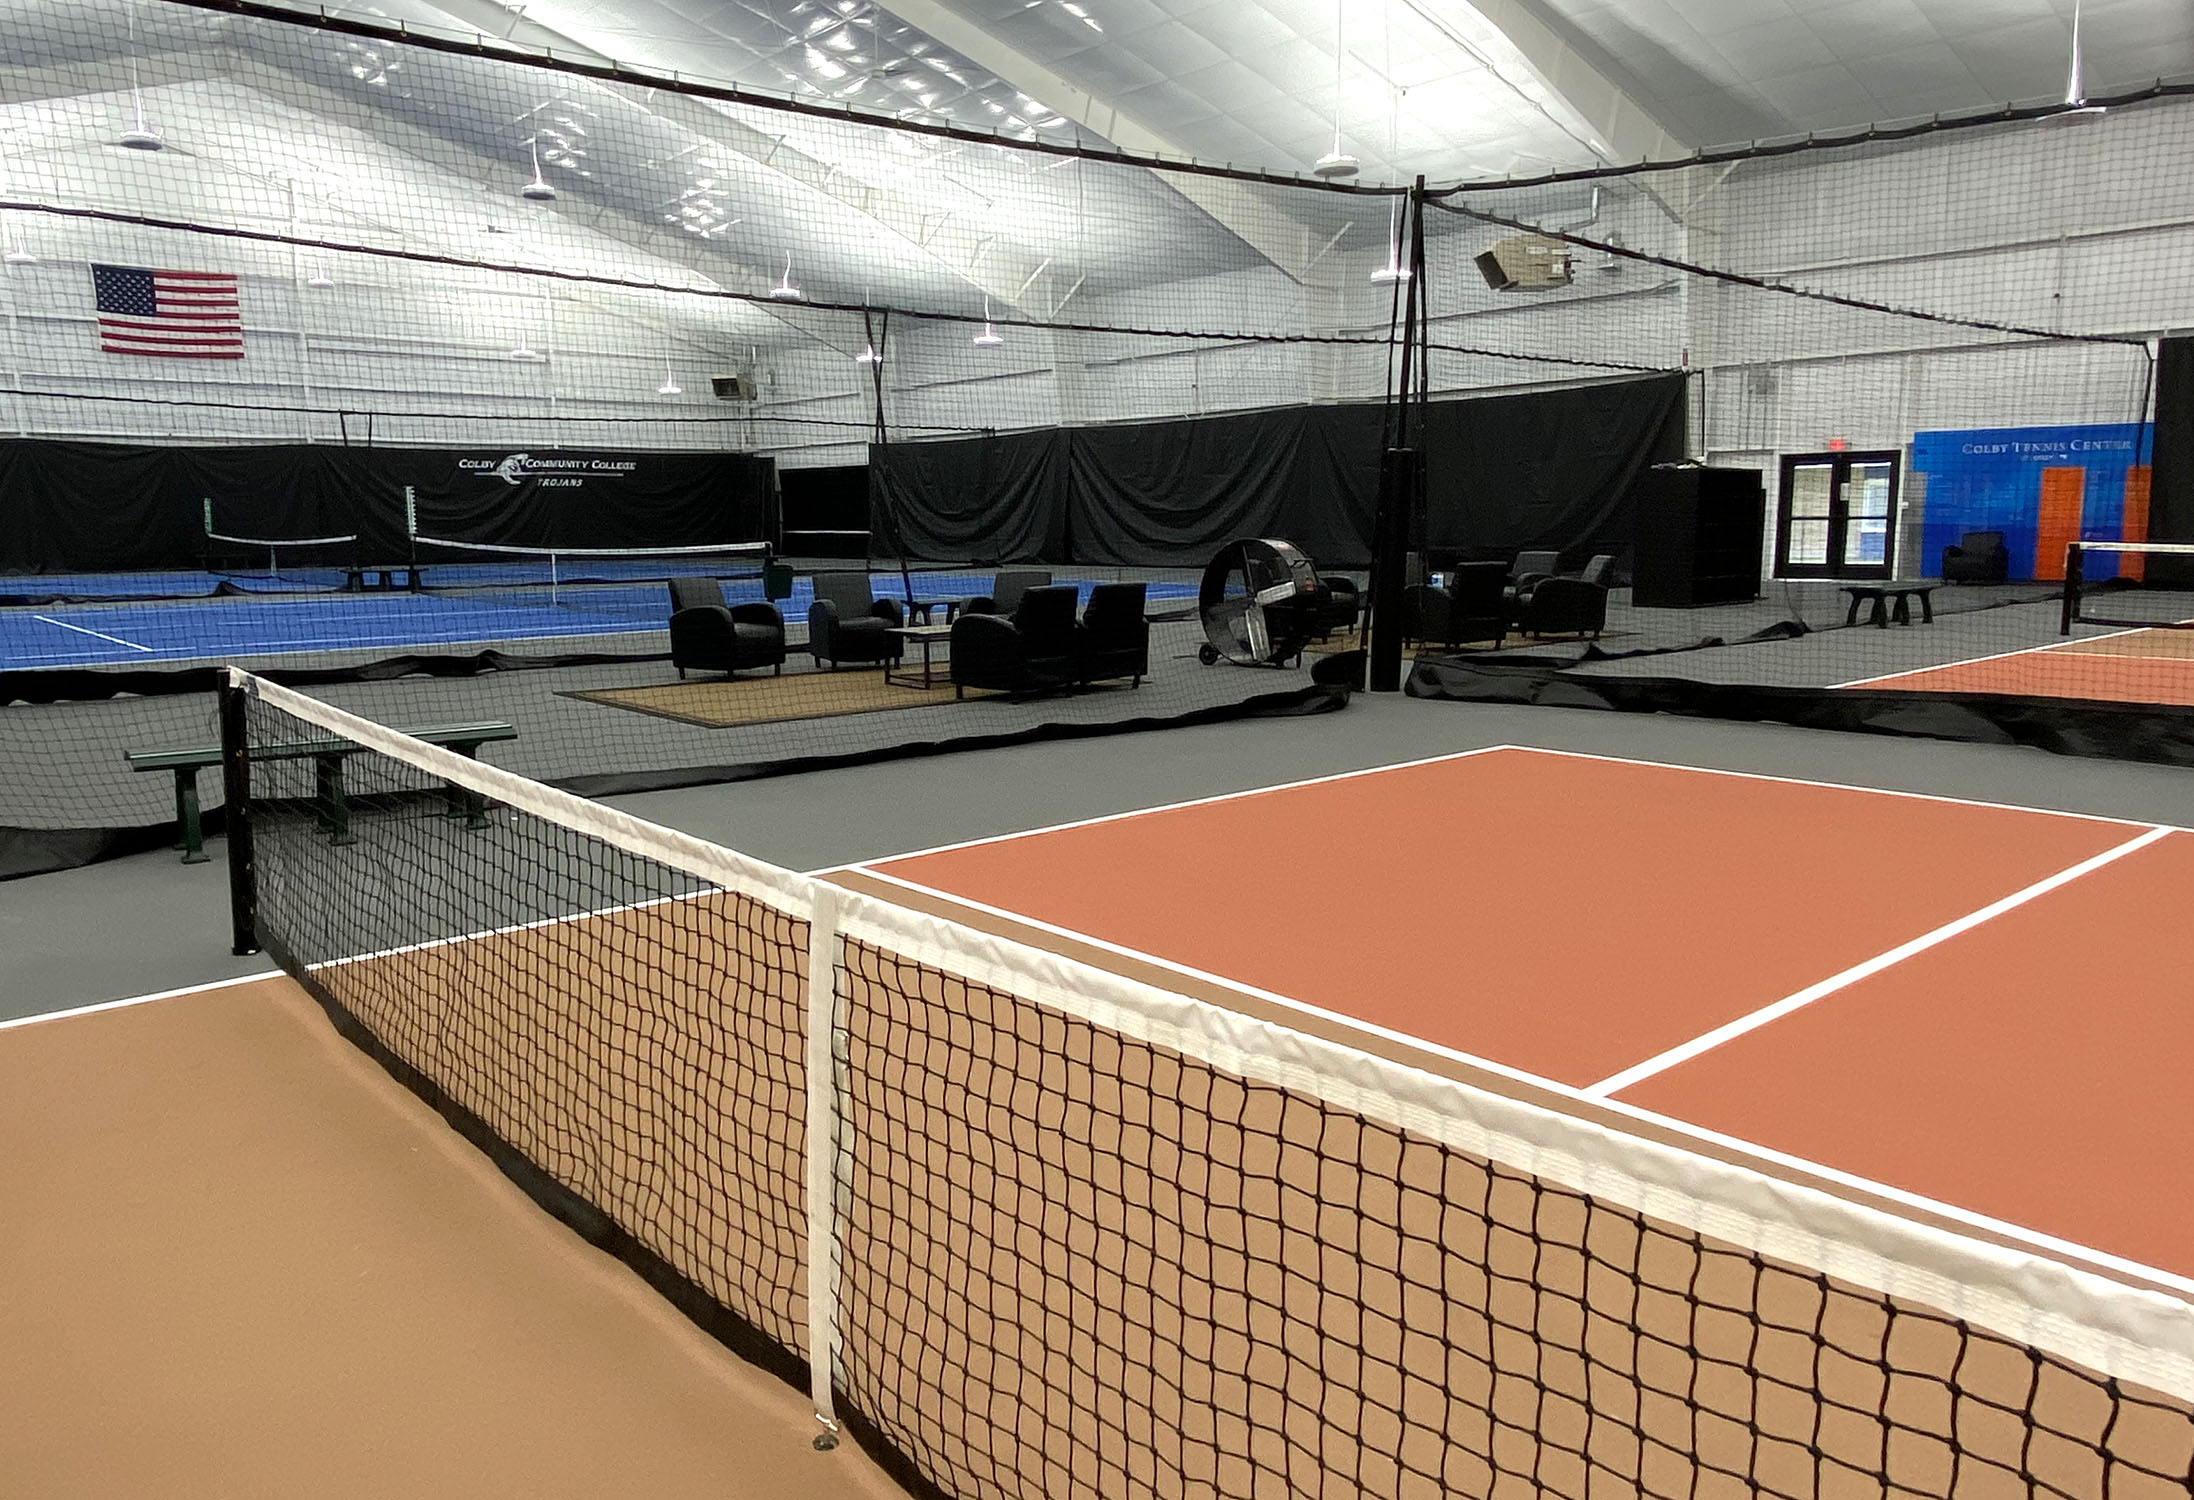 Reserve a court at the Colby Tennis Center